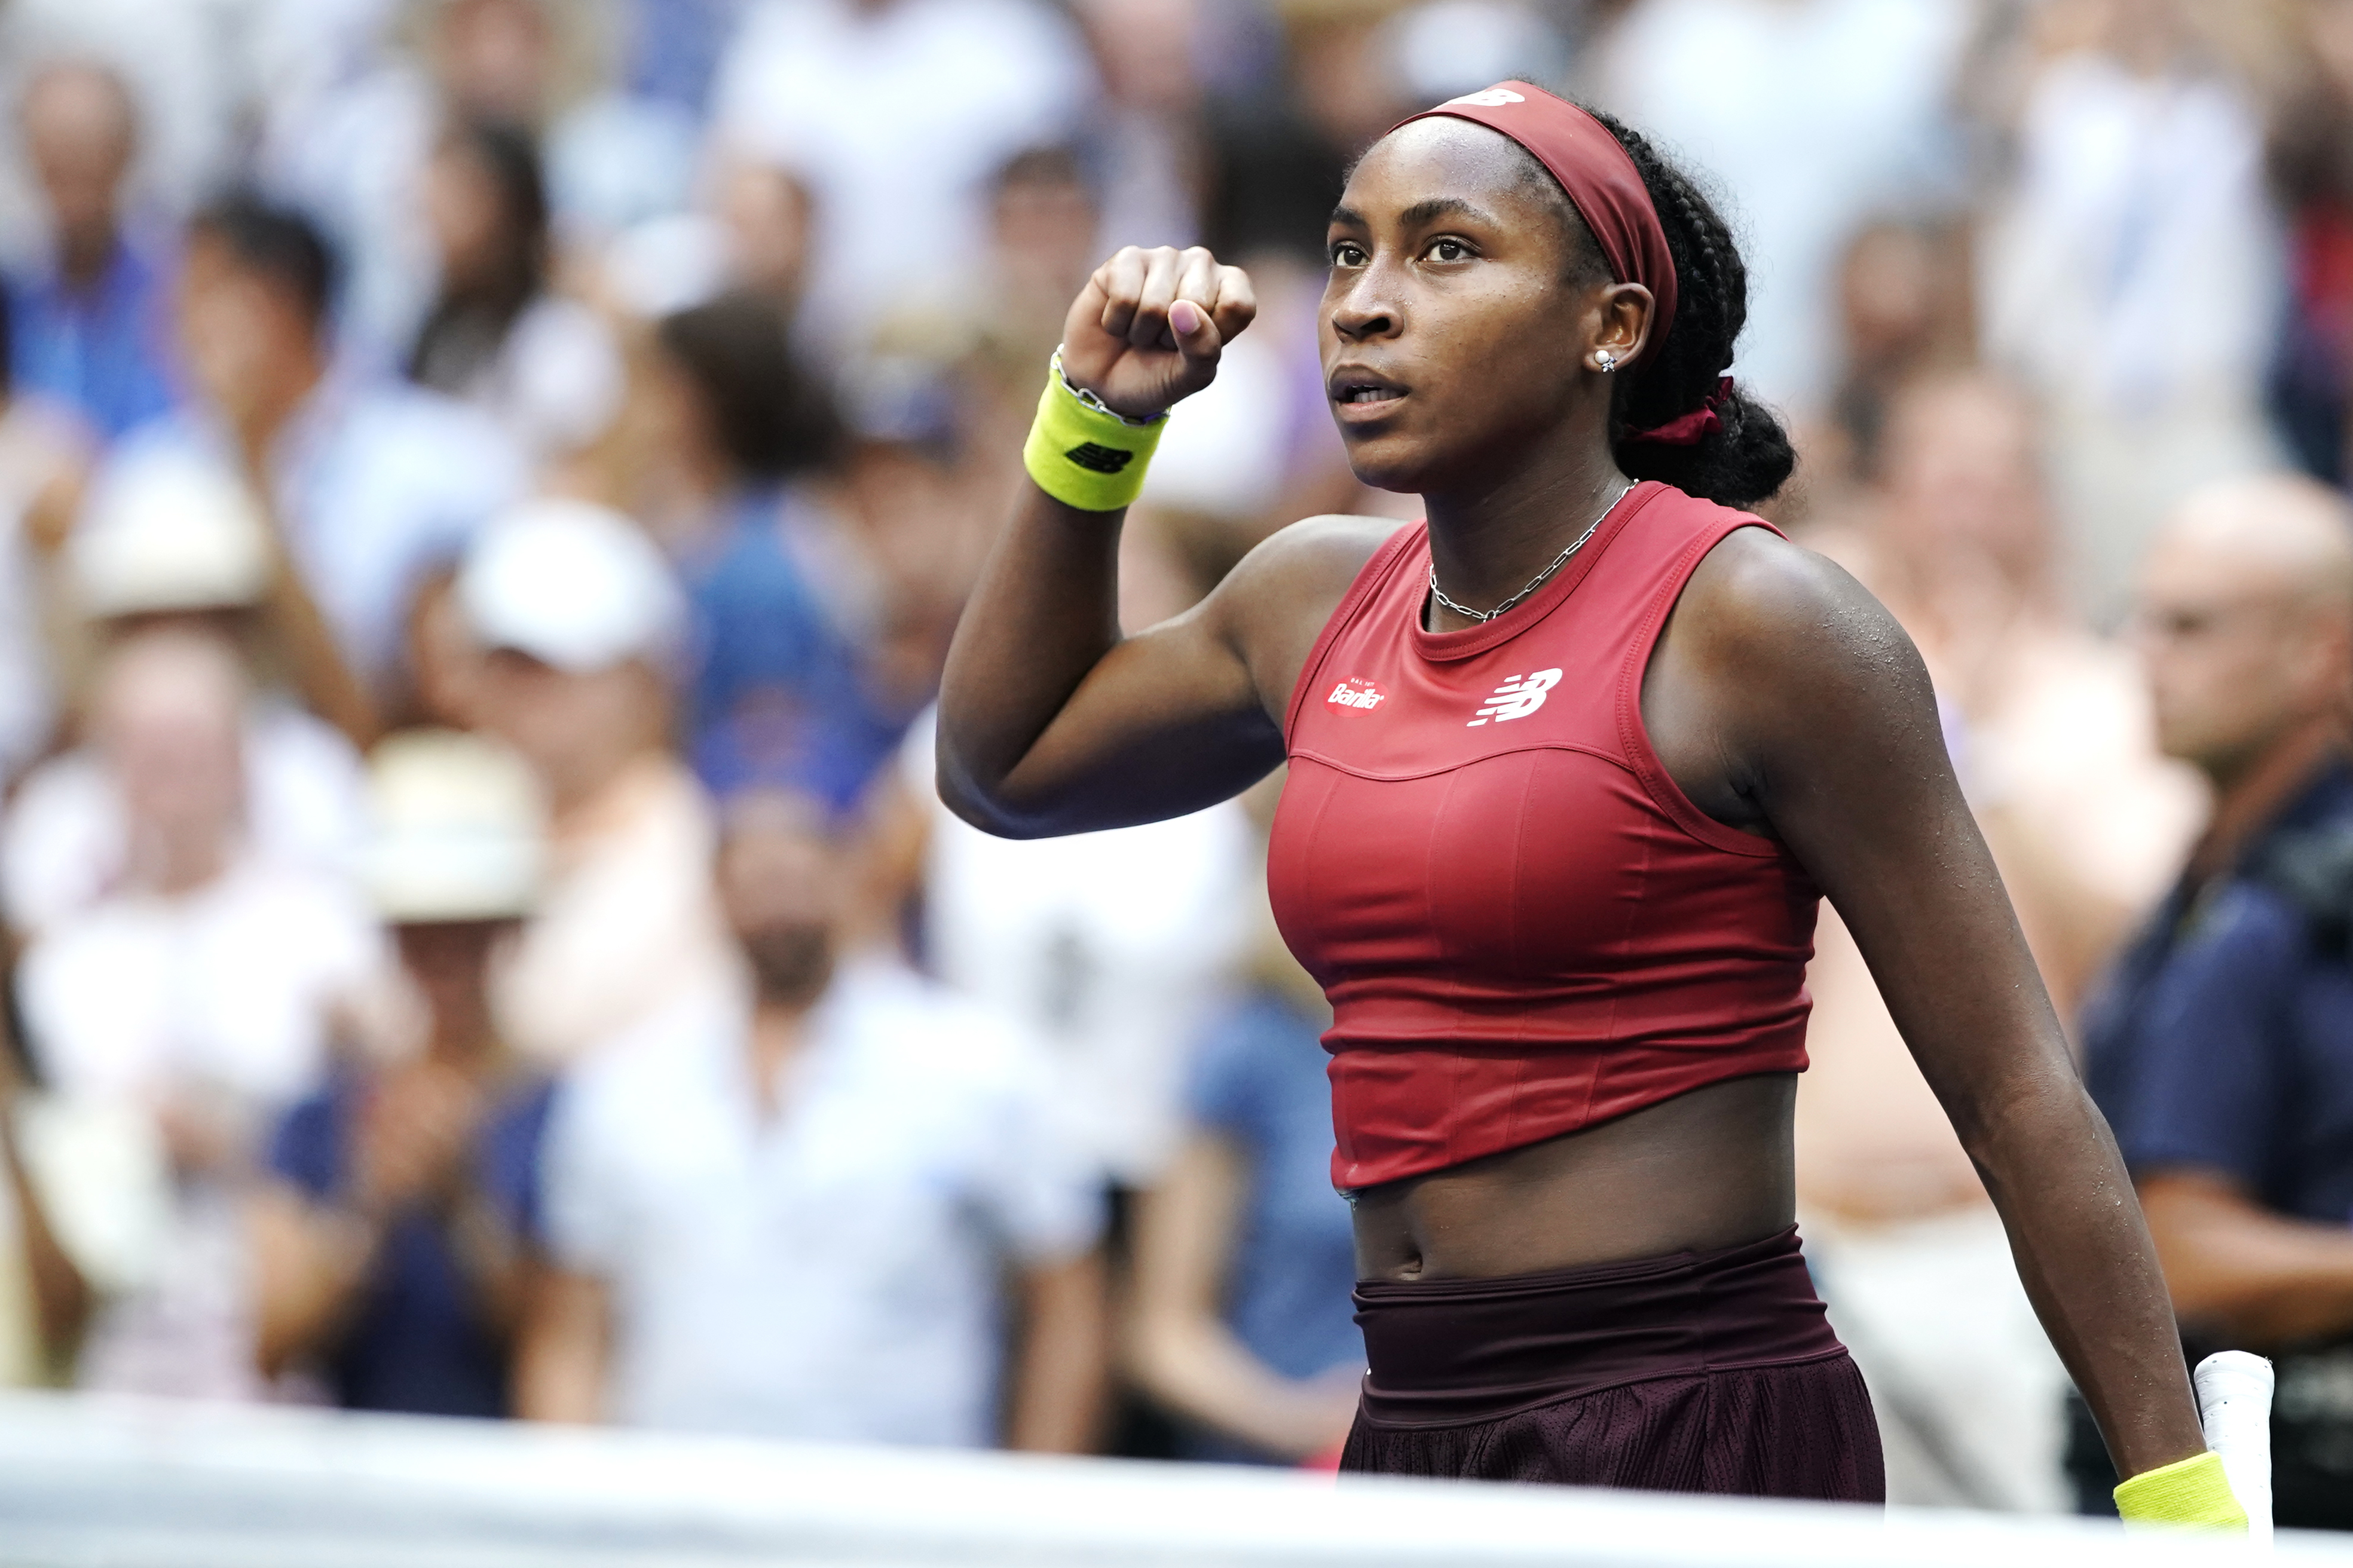 How to watch US Open quarterfinals FREE live streams, dates, times, USA TV, channels for Novak Djokovic, Coco Gauff online